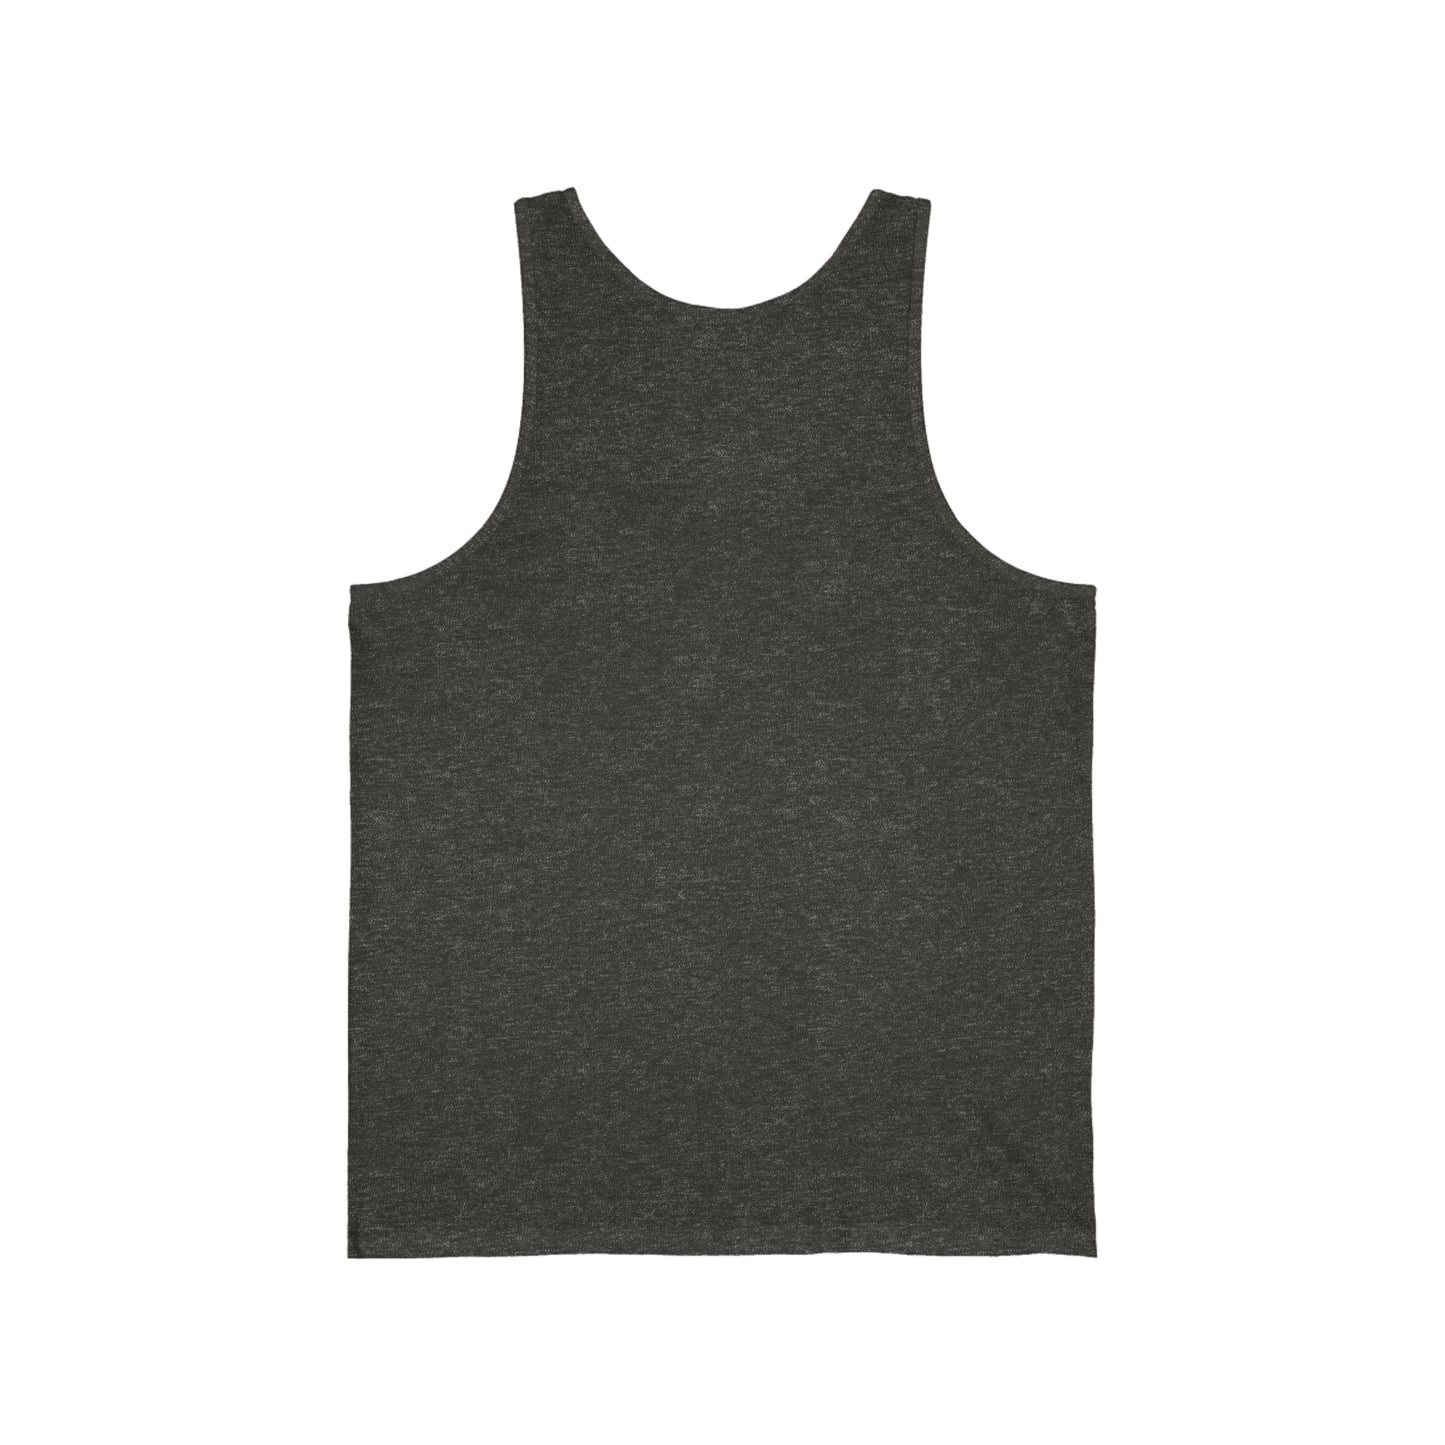 Expect Miracles Unisex Jersey Tank